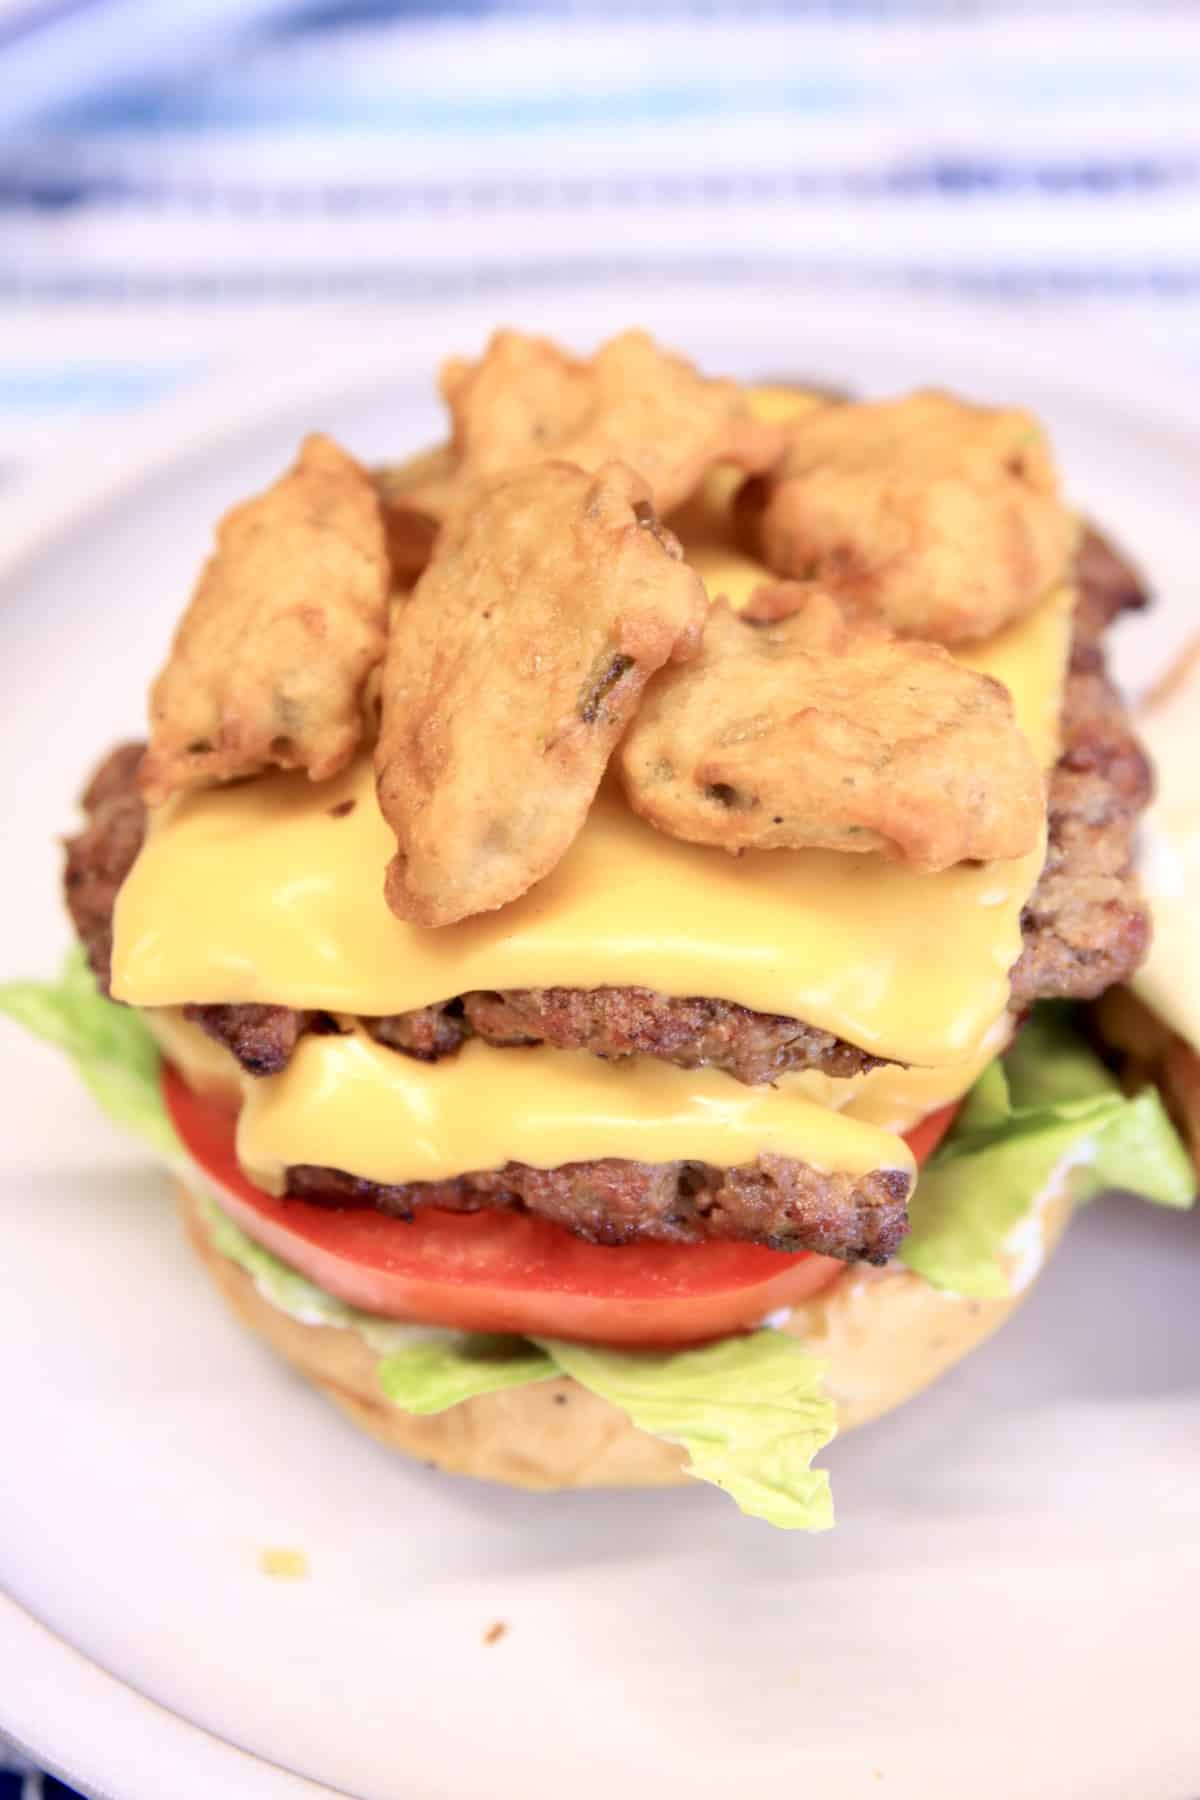 Double cheeseburger with fried pickles (top bun missing).